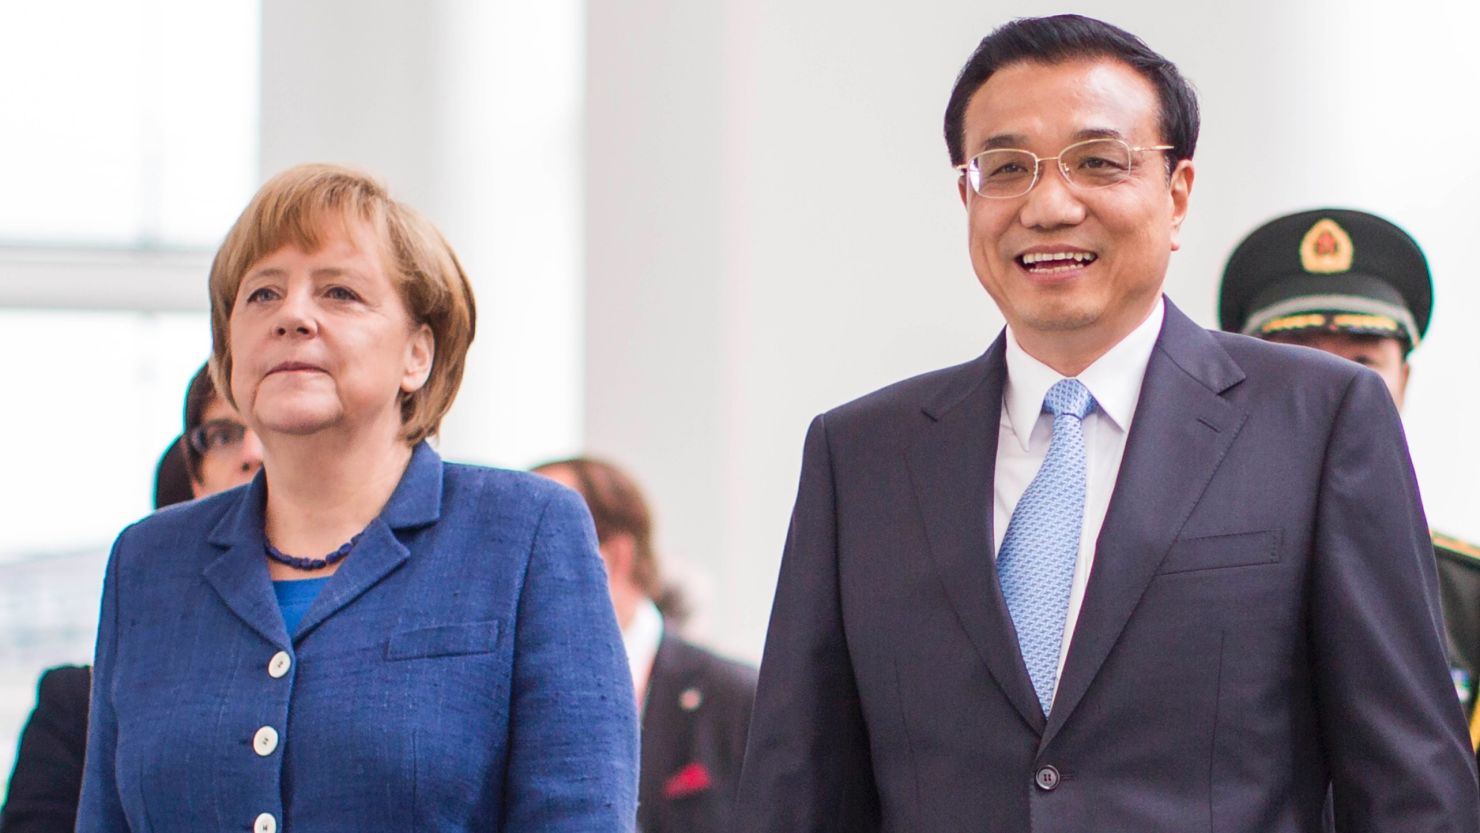 German Chancellor Angela Merkel meets Chinese Prime Minister Li Keqiang  during his first official visit to Germany.